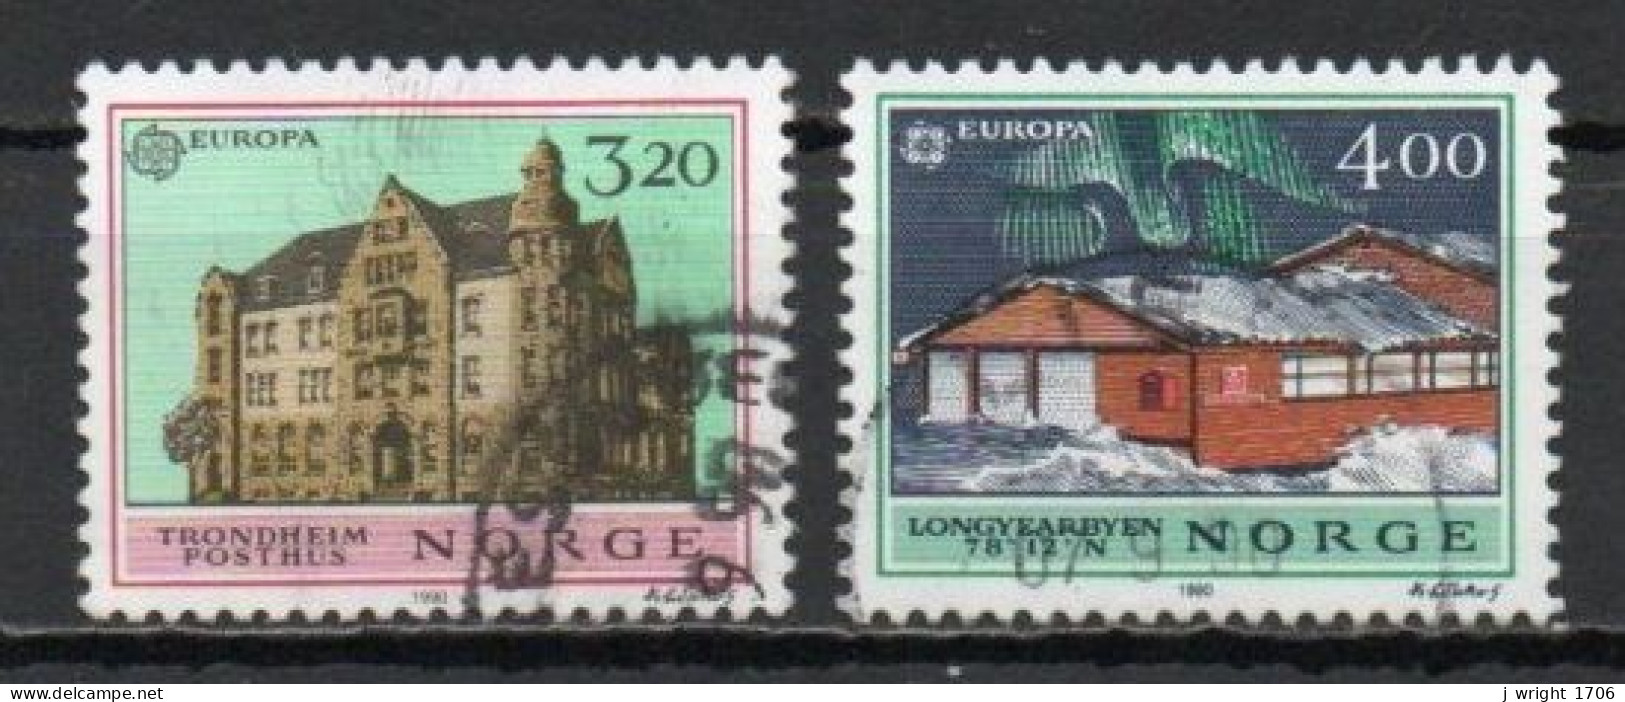 Norway, 1990, Europa CEPT, Set, USED - Used Stamps